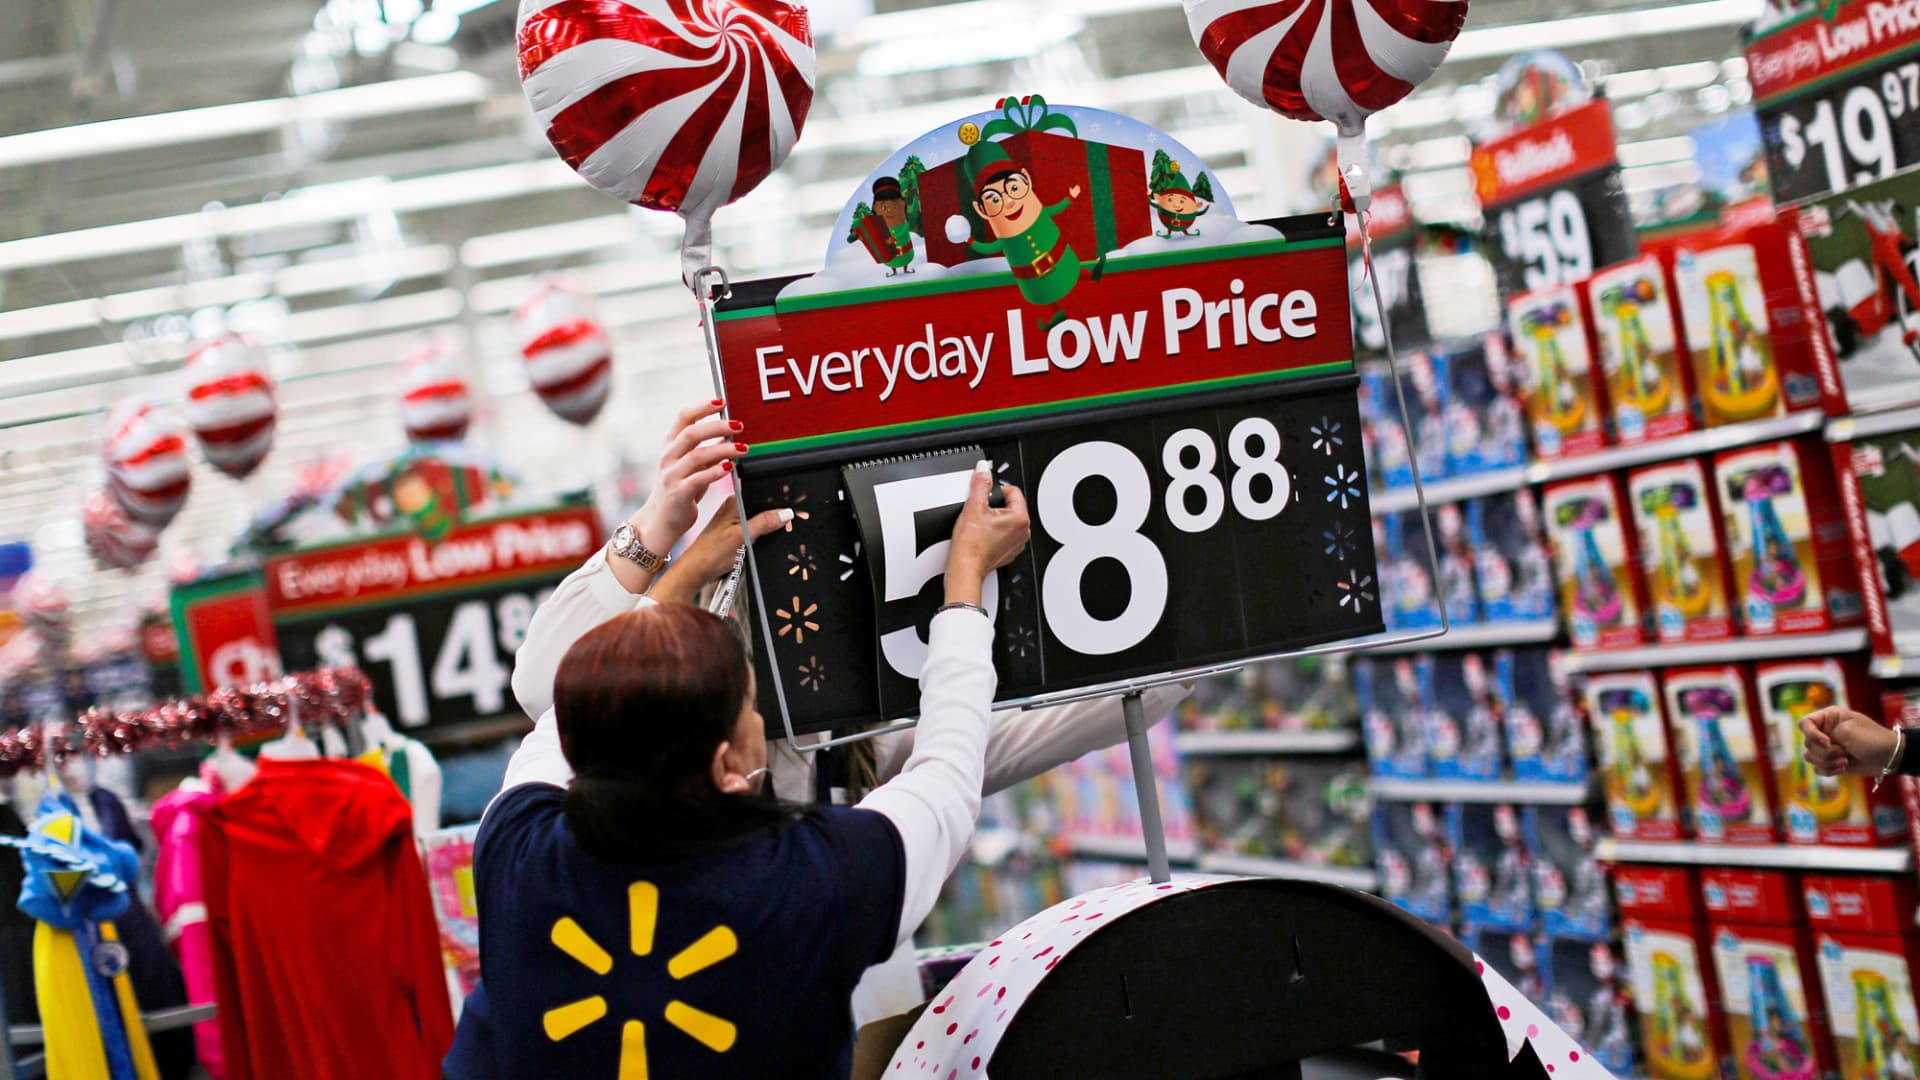 Walmart plans to hire 40,000 workers for the holiday season